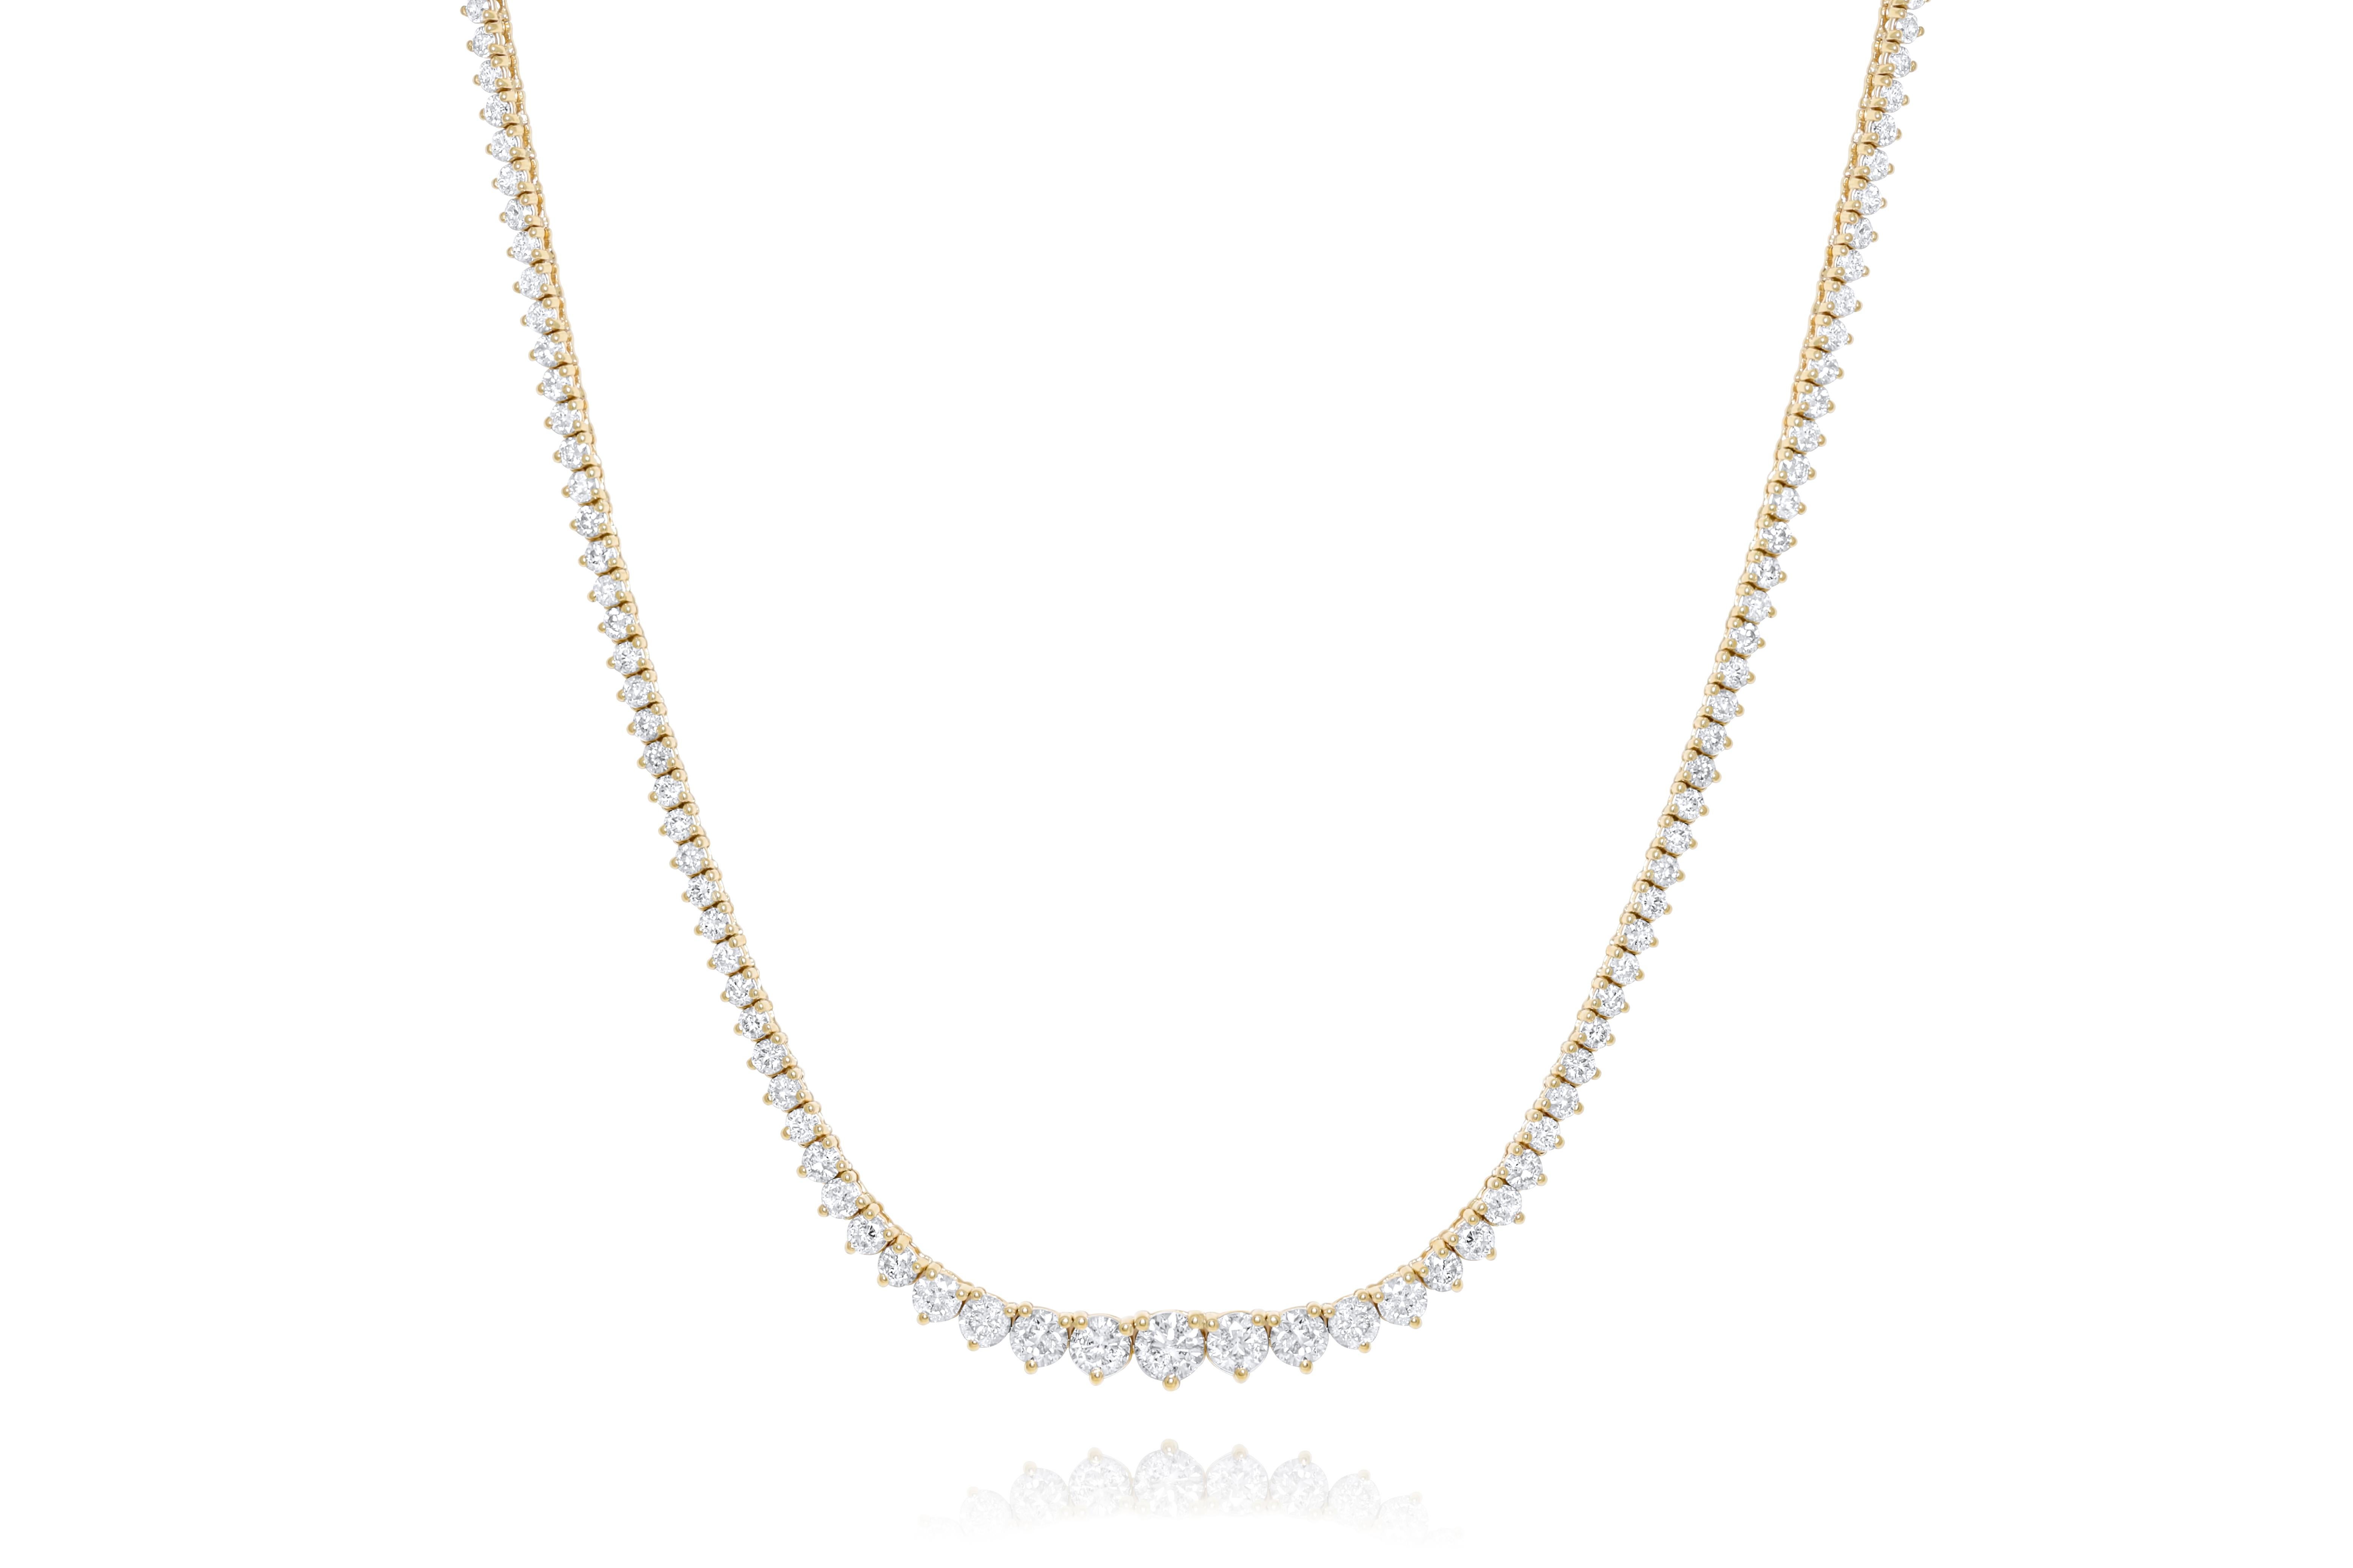 14kt yellow gold graduated tennis necklace featuring 10.00 cts of round diamonds, 17